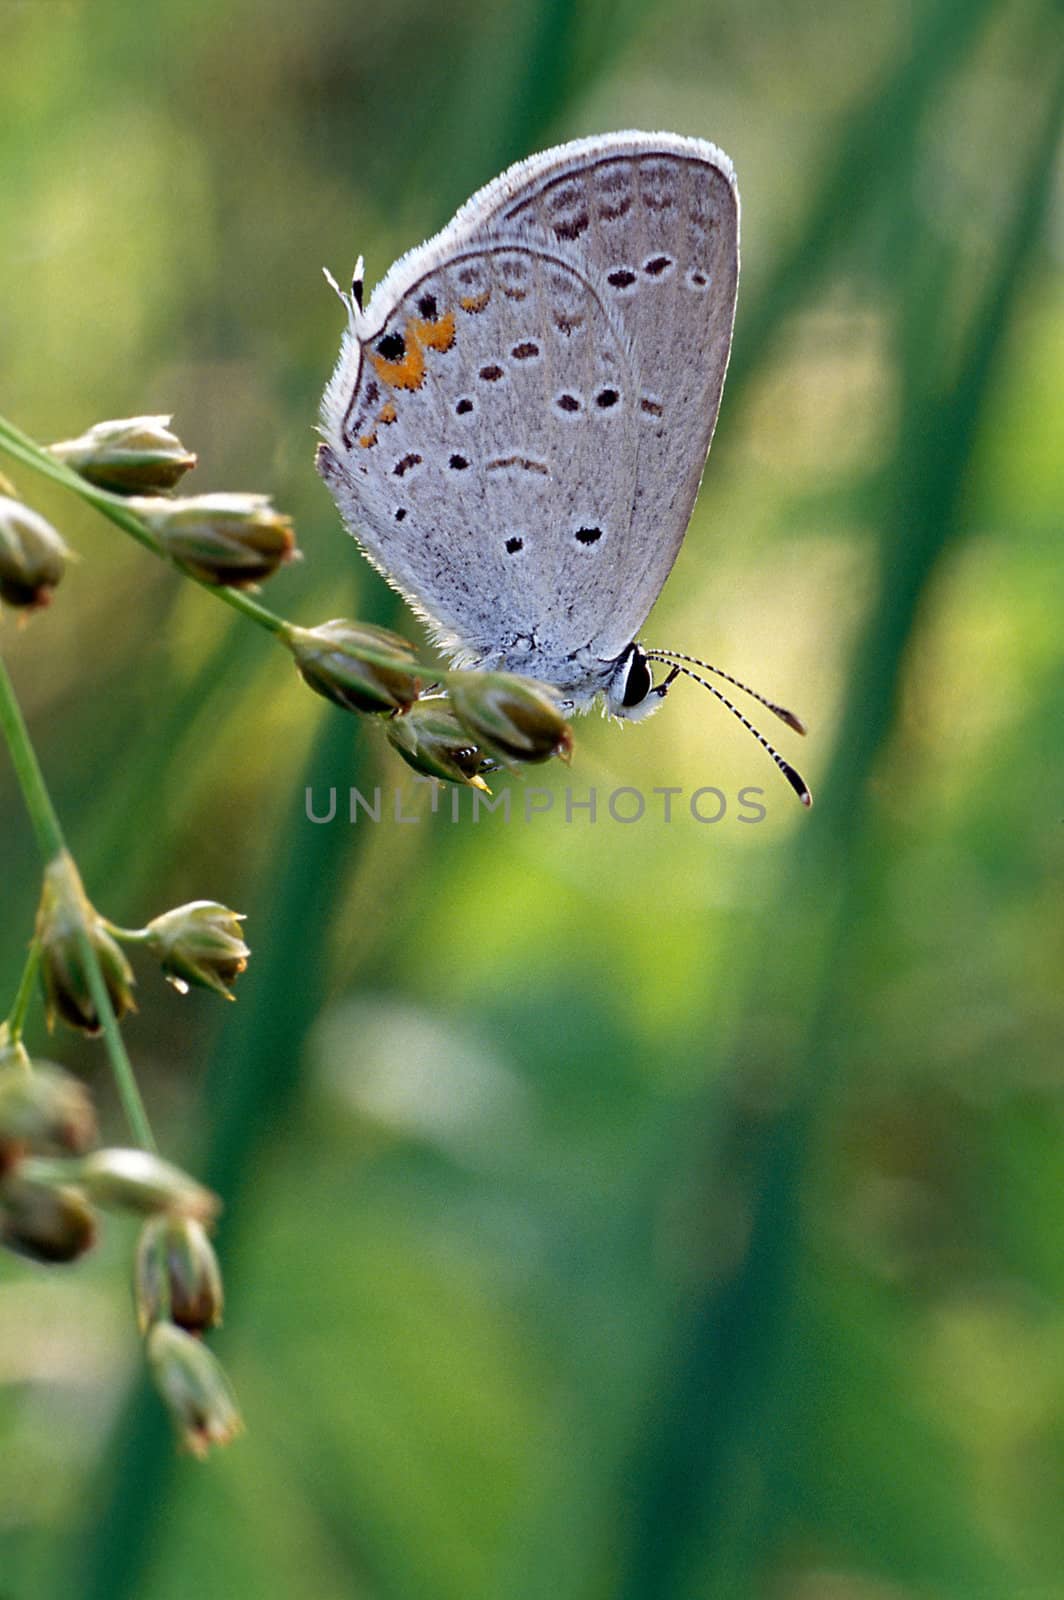 Gray Hirstreak Butterfly perched on a stem